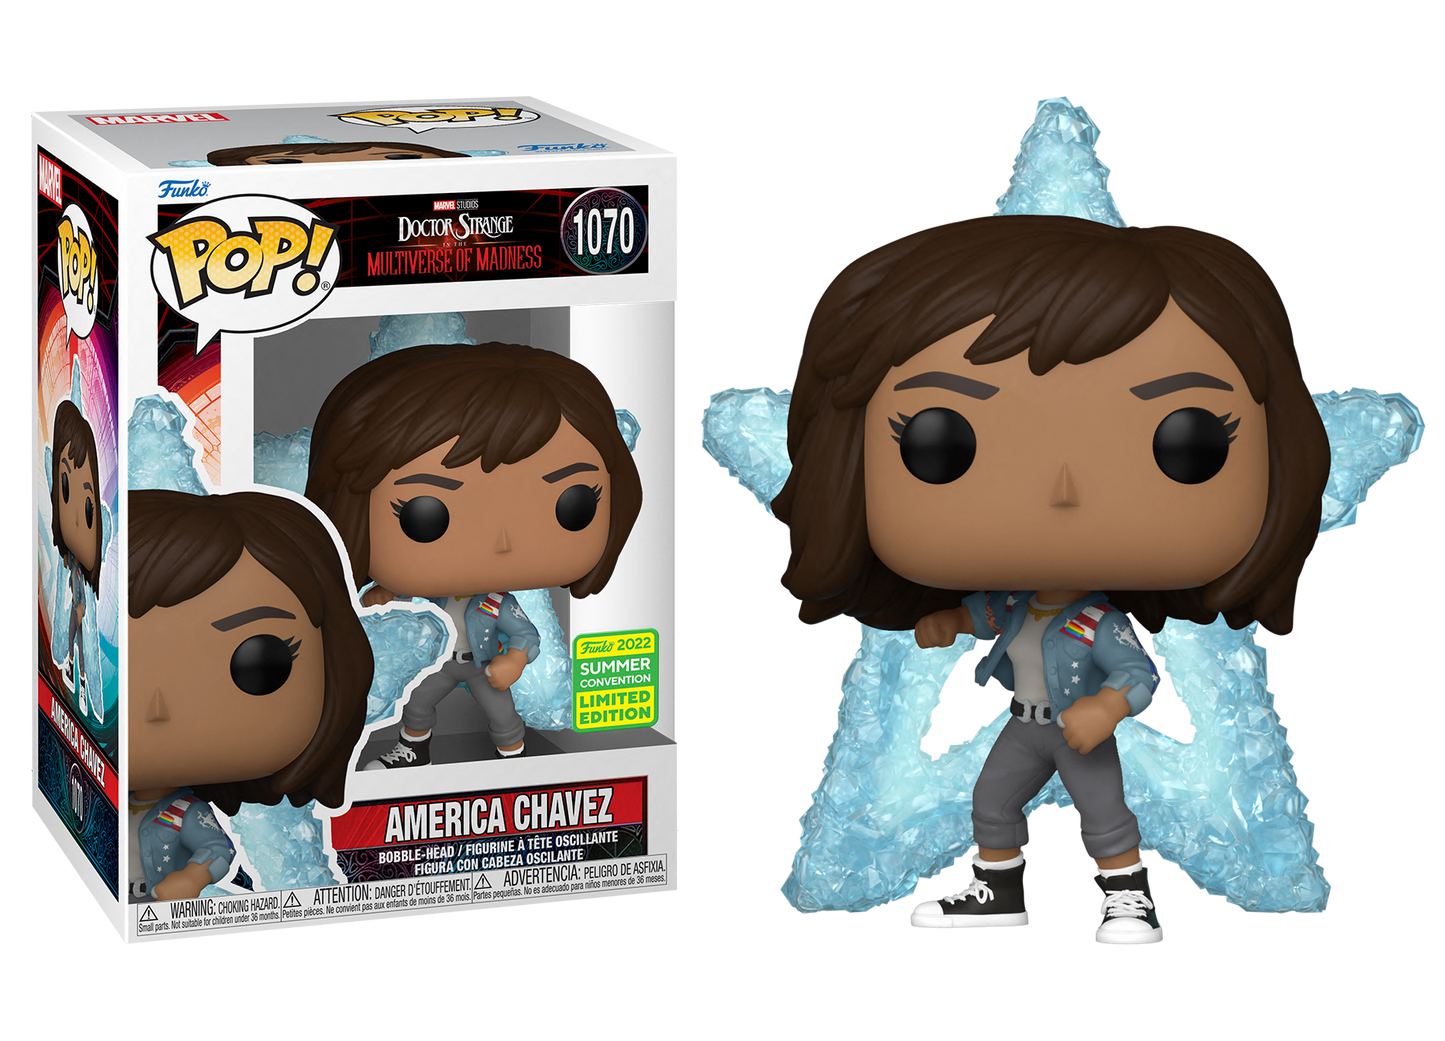 Doctor Strange 2: Multiverse of Madness - America Chavez SDCC 2022 Summer Convention Exclusive Pop! Vinyl